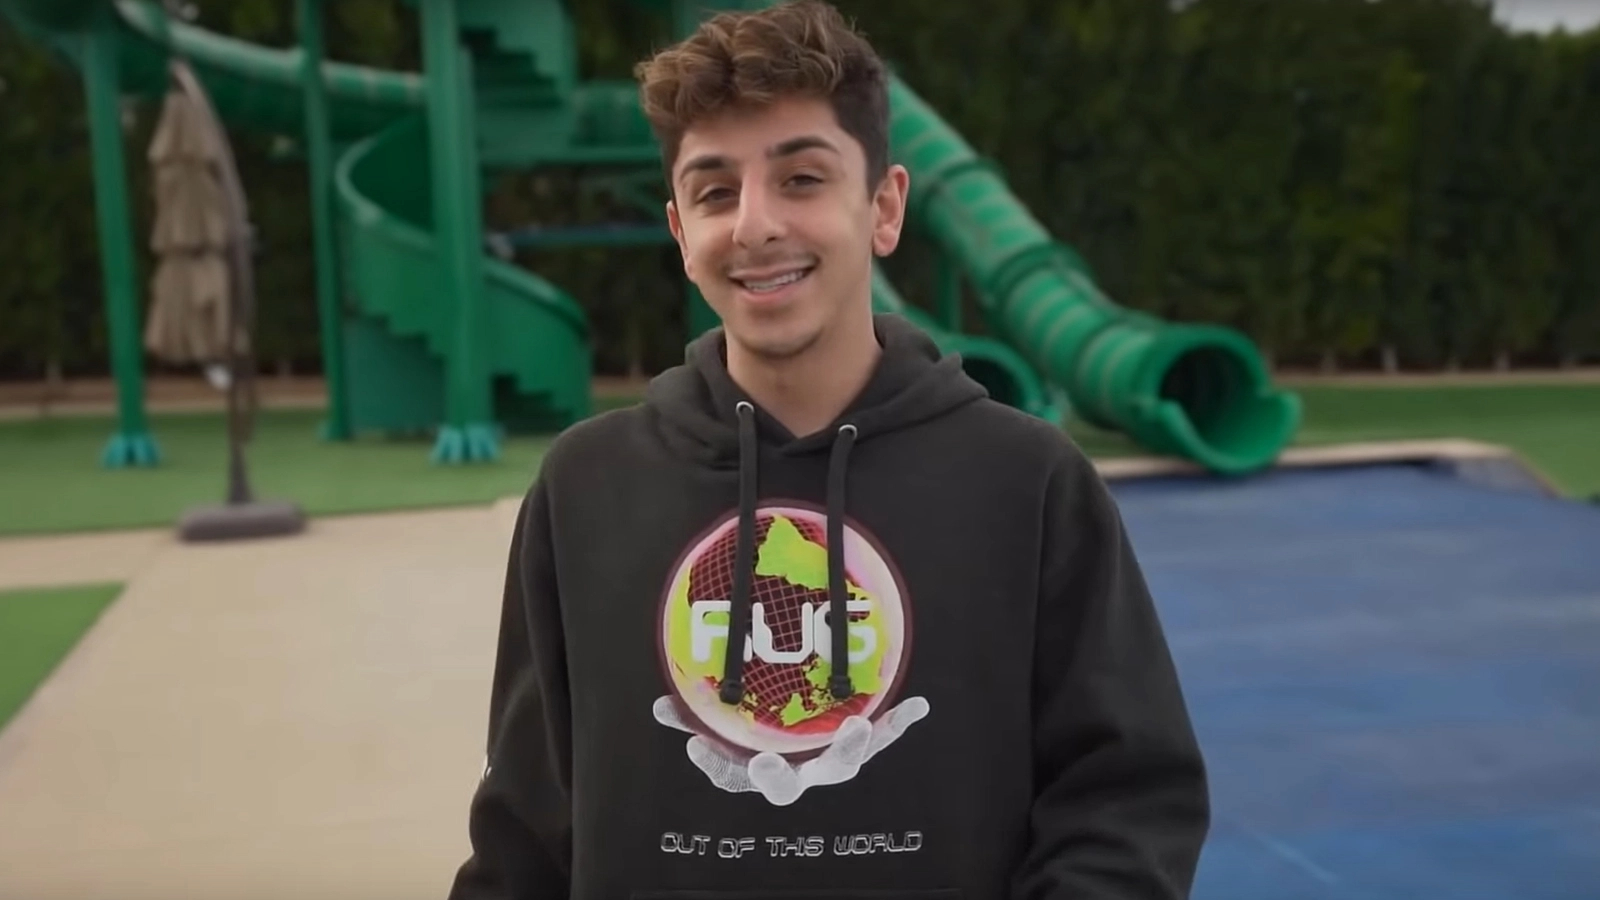 Faze Rug Reveals New Management Signing In Natural Next Step For His Career Dexerto